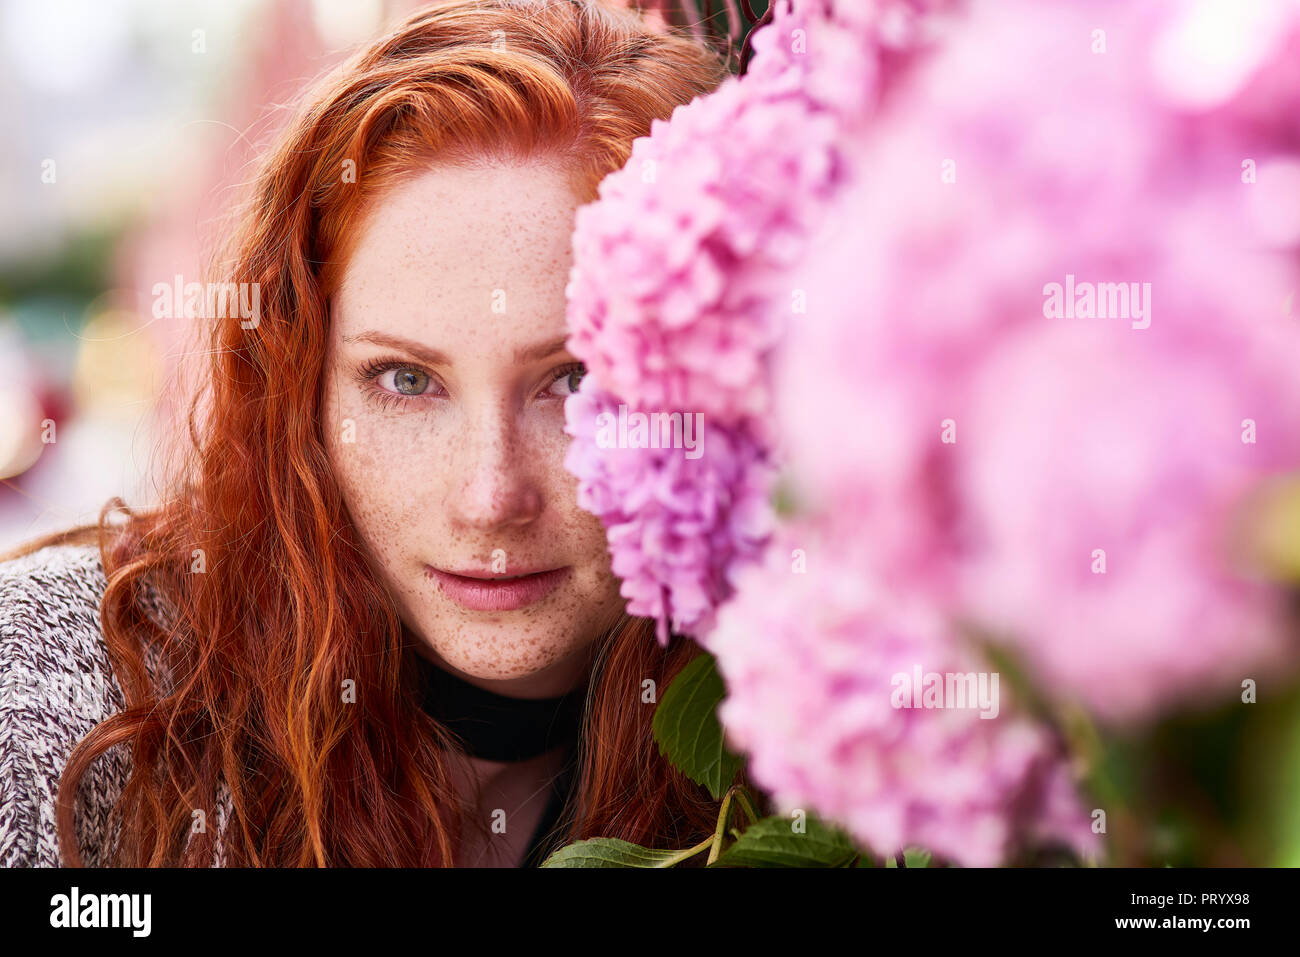 Portrait of redheaded young woman with freckles Stock Photo